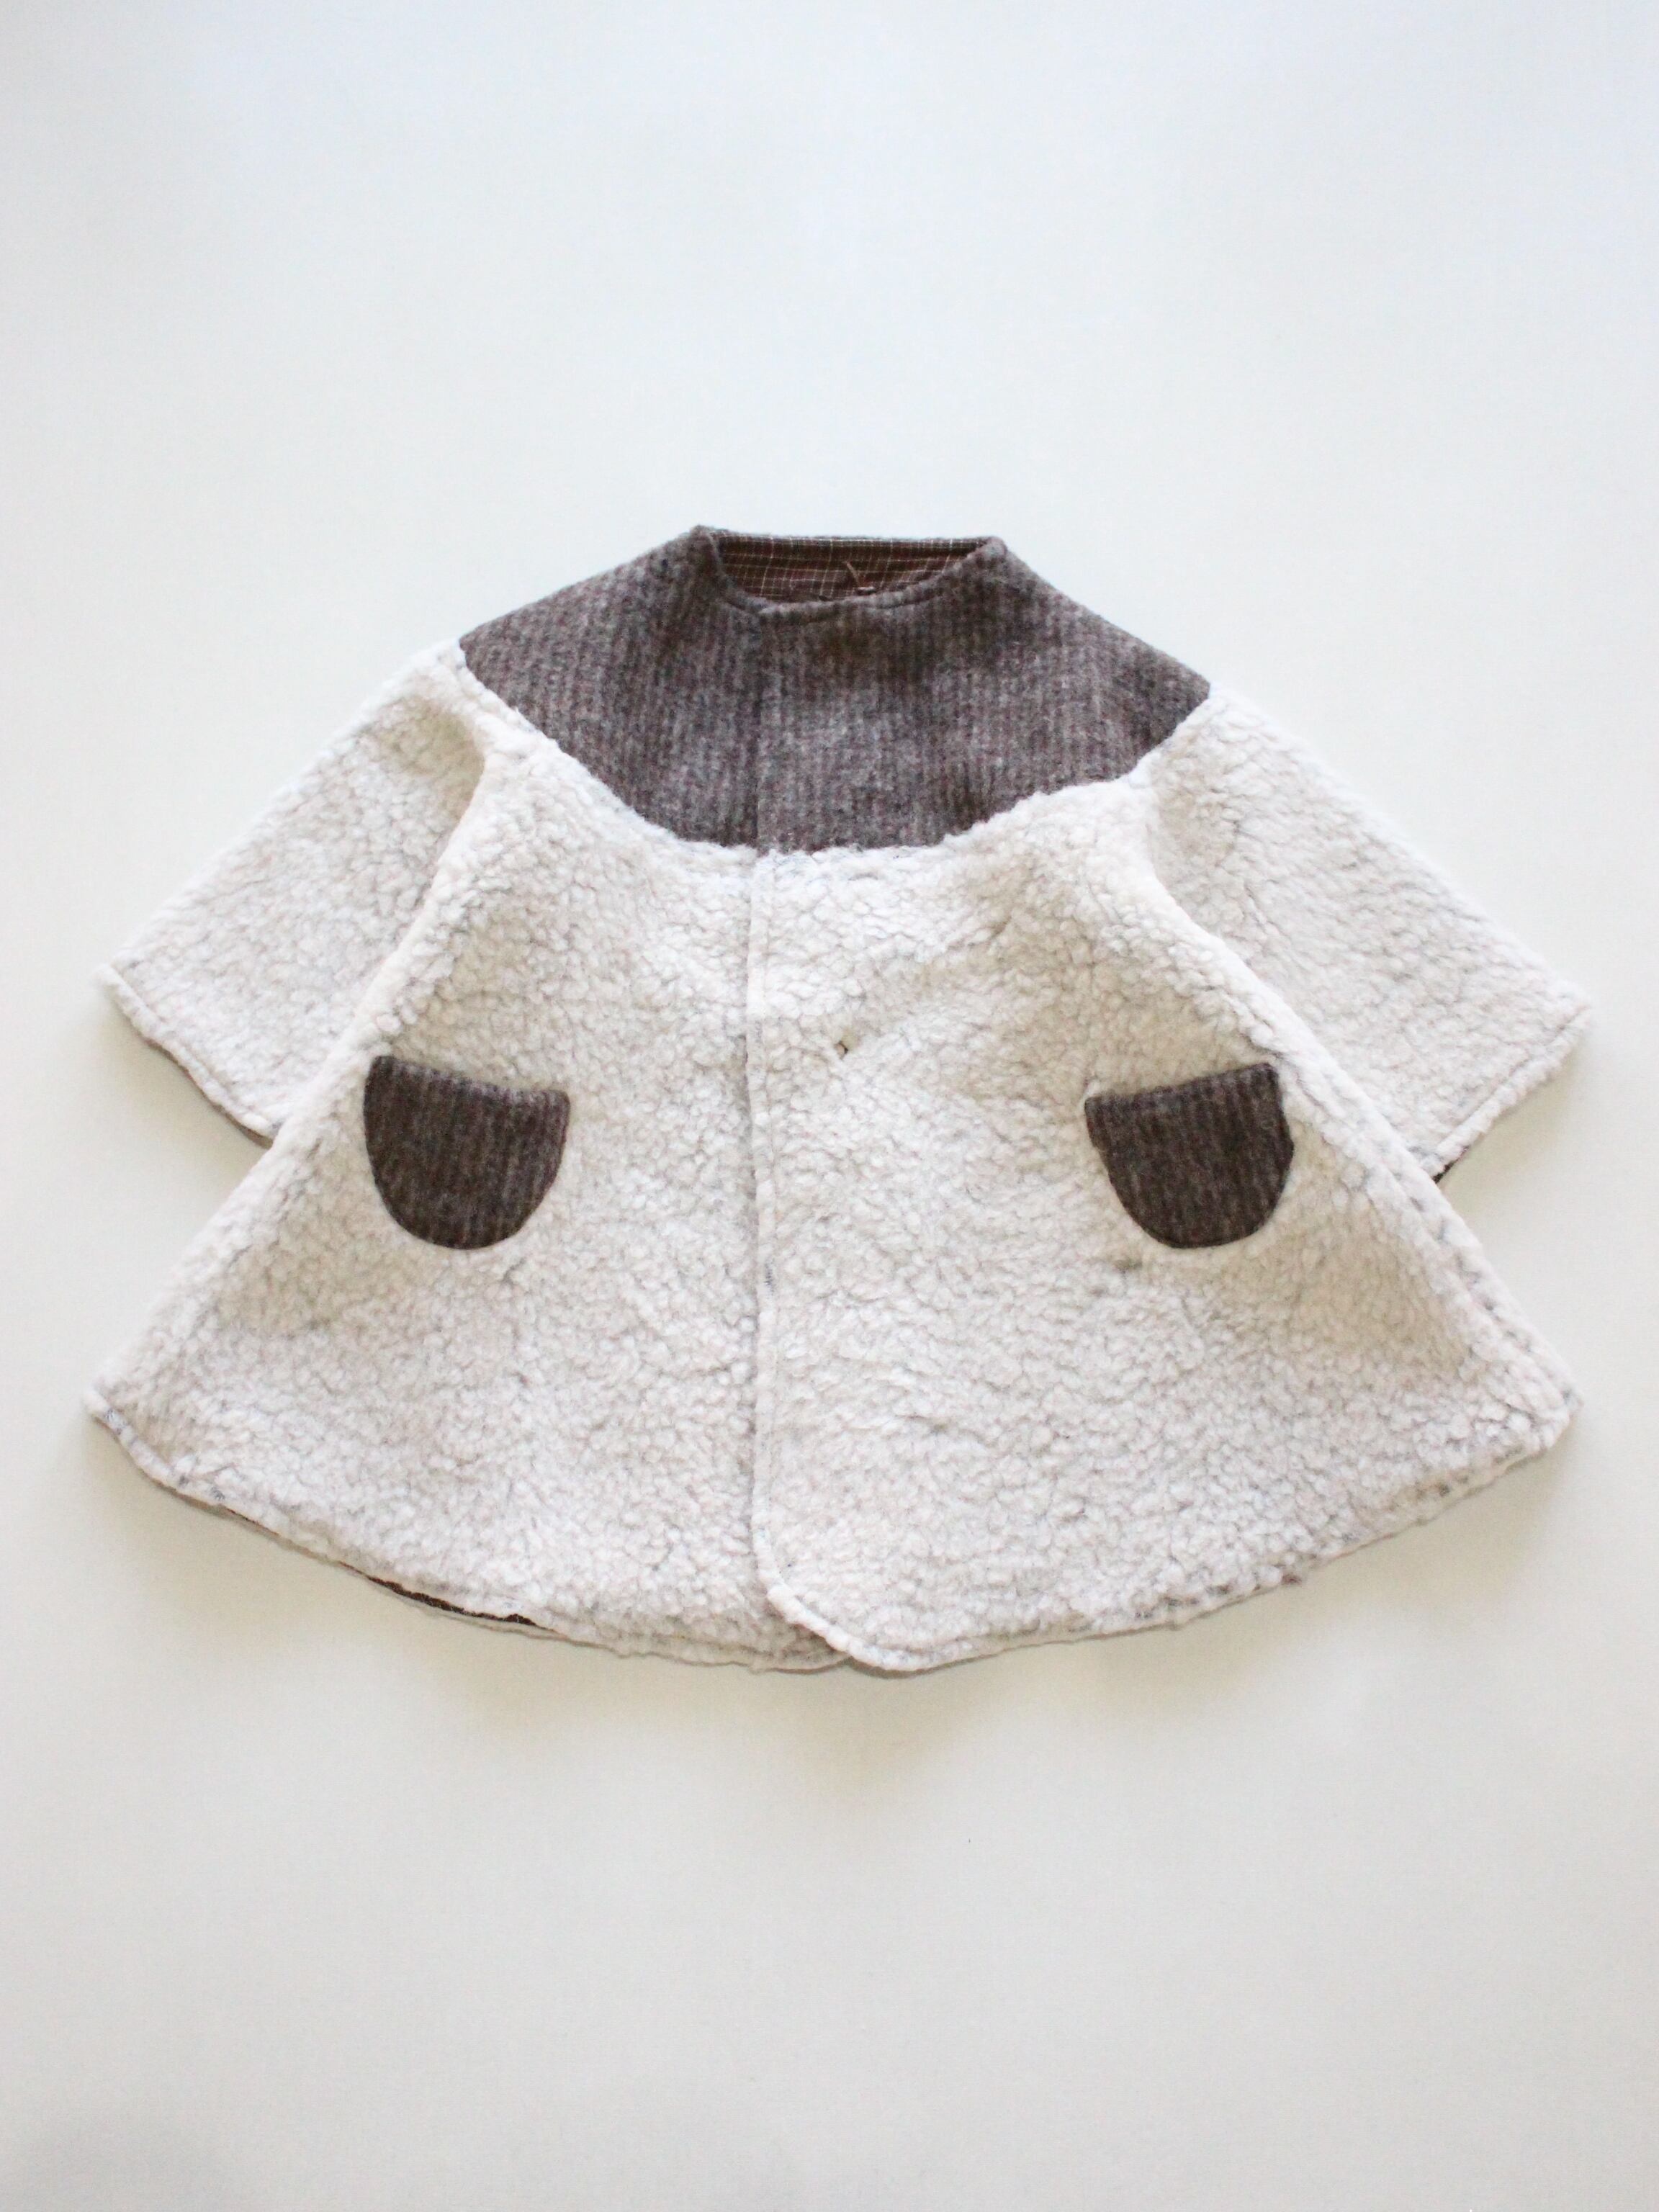 hello lupo Bell coat bianco 2-3y